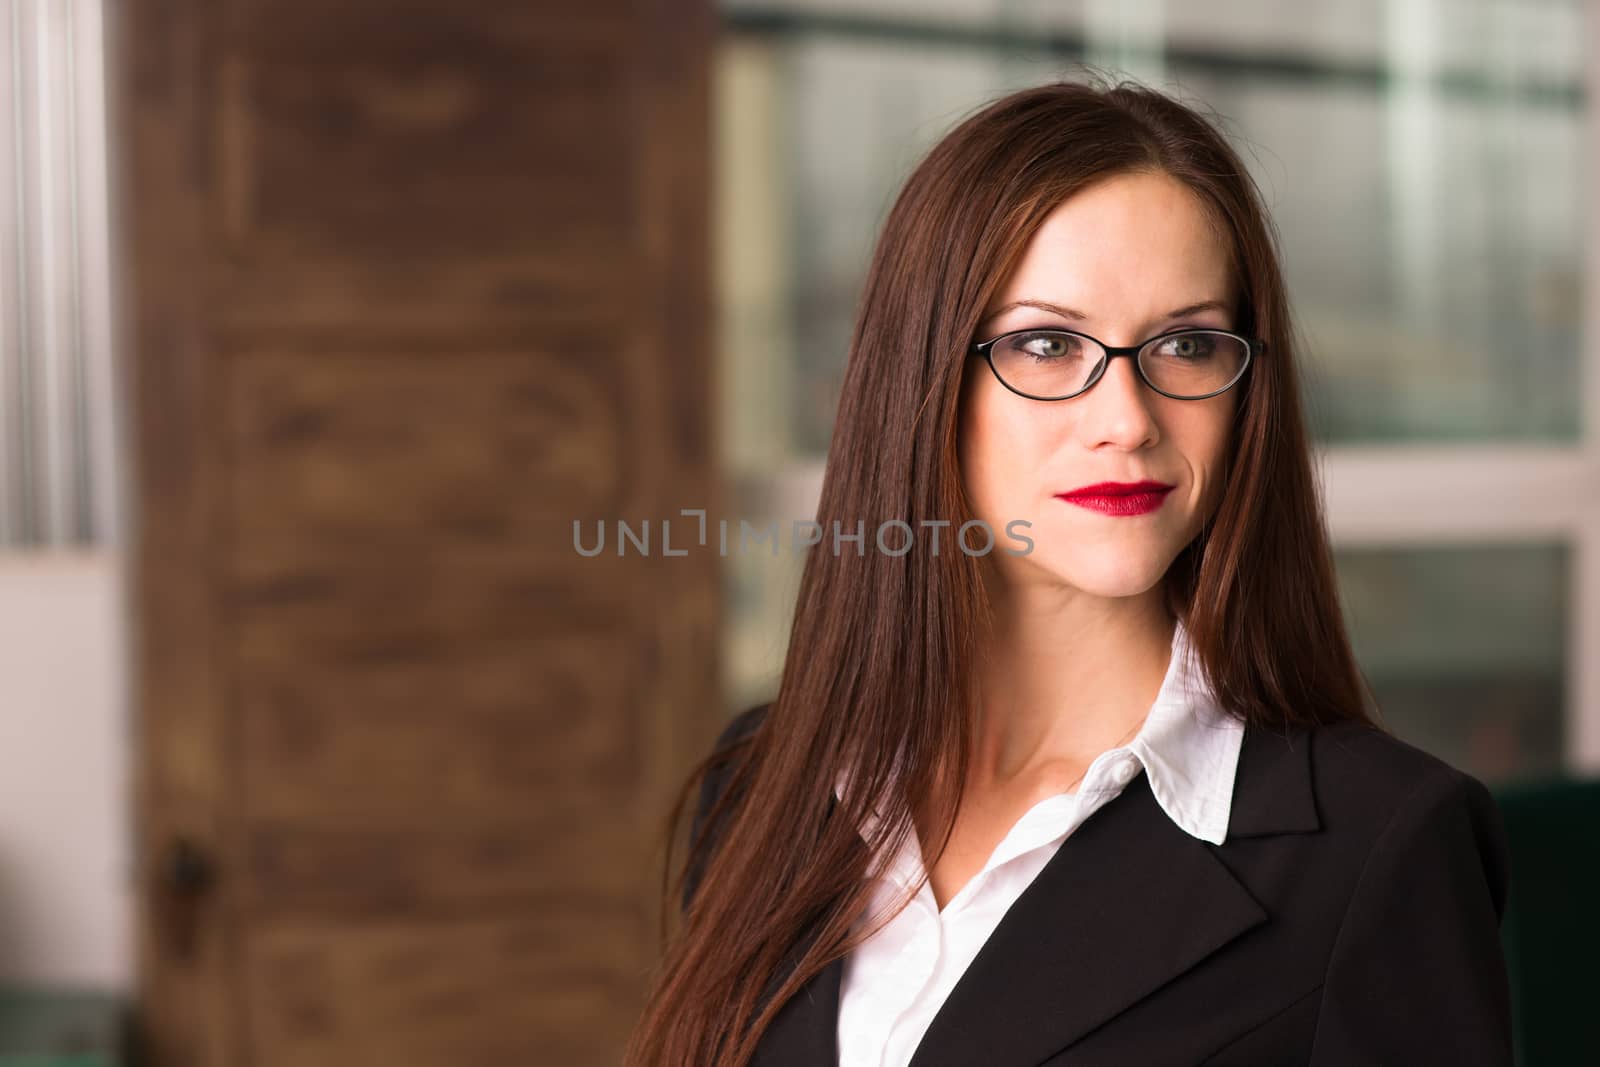 INtellectual Business Woman Female Eyeglasses Smiling Office Work by ChrisBoswell